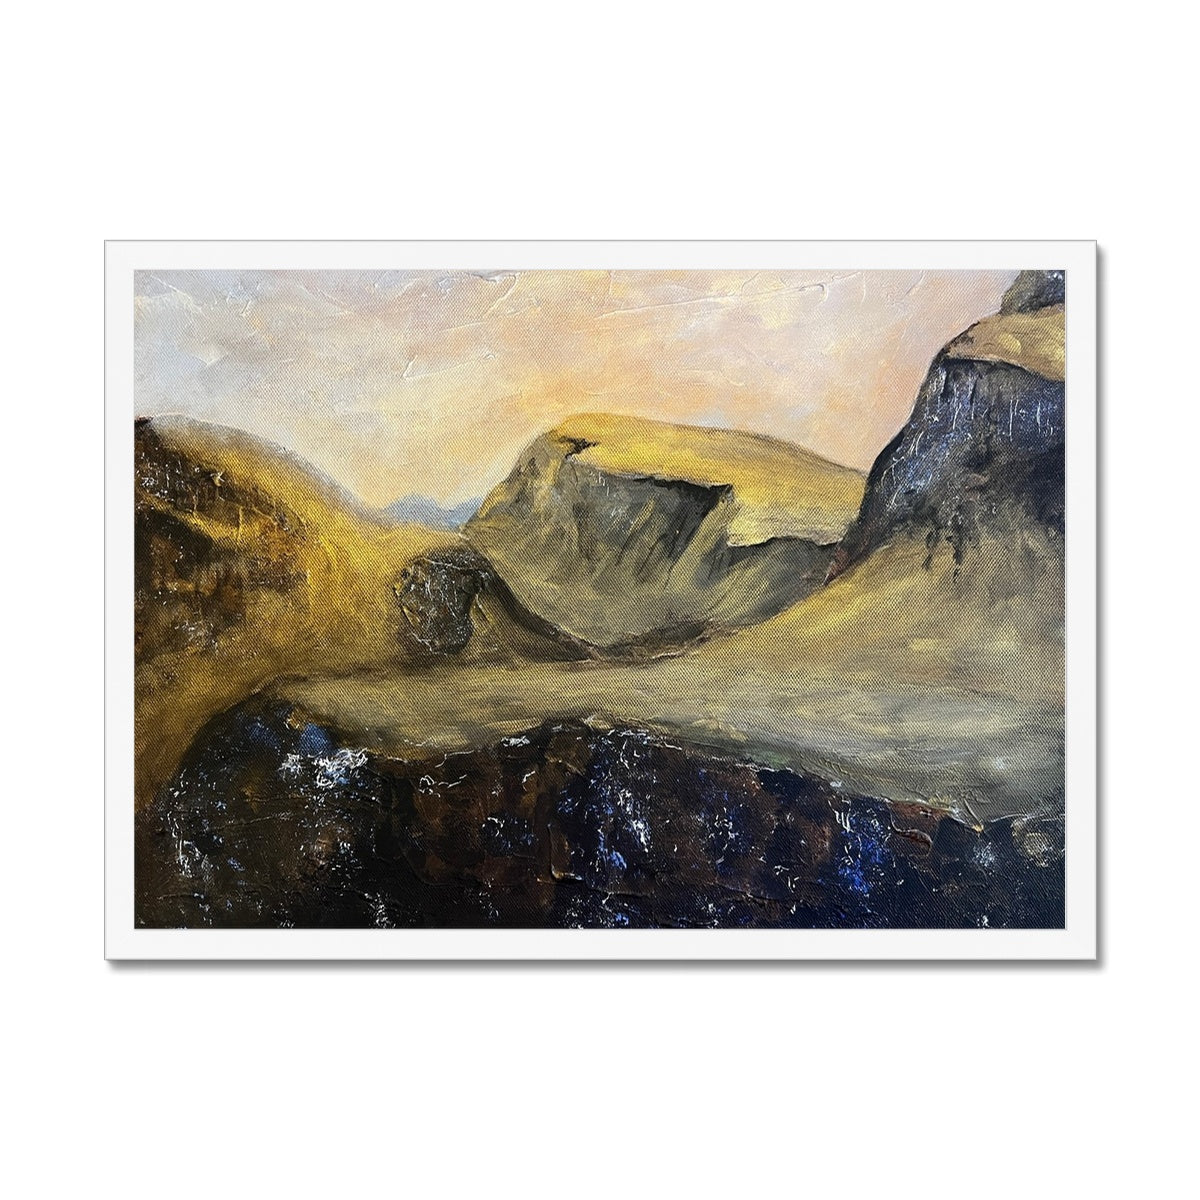 The Quiraing Skye Painting | Framed Prints From Scotland-Framed Prints-Skye Art Gallery-A2 Landscape-White Frame-Paintings, Prints, Homeware, Art Gifts From Scotland By Scottish Artist Kevin Hunter